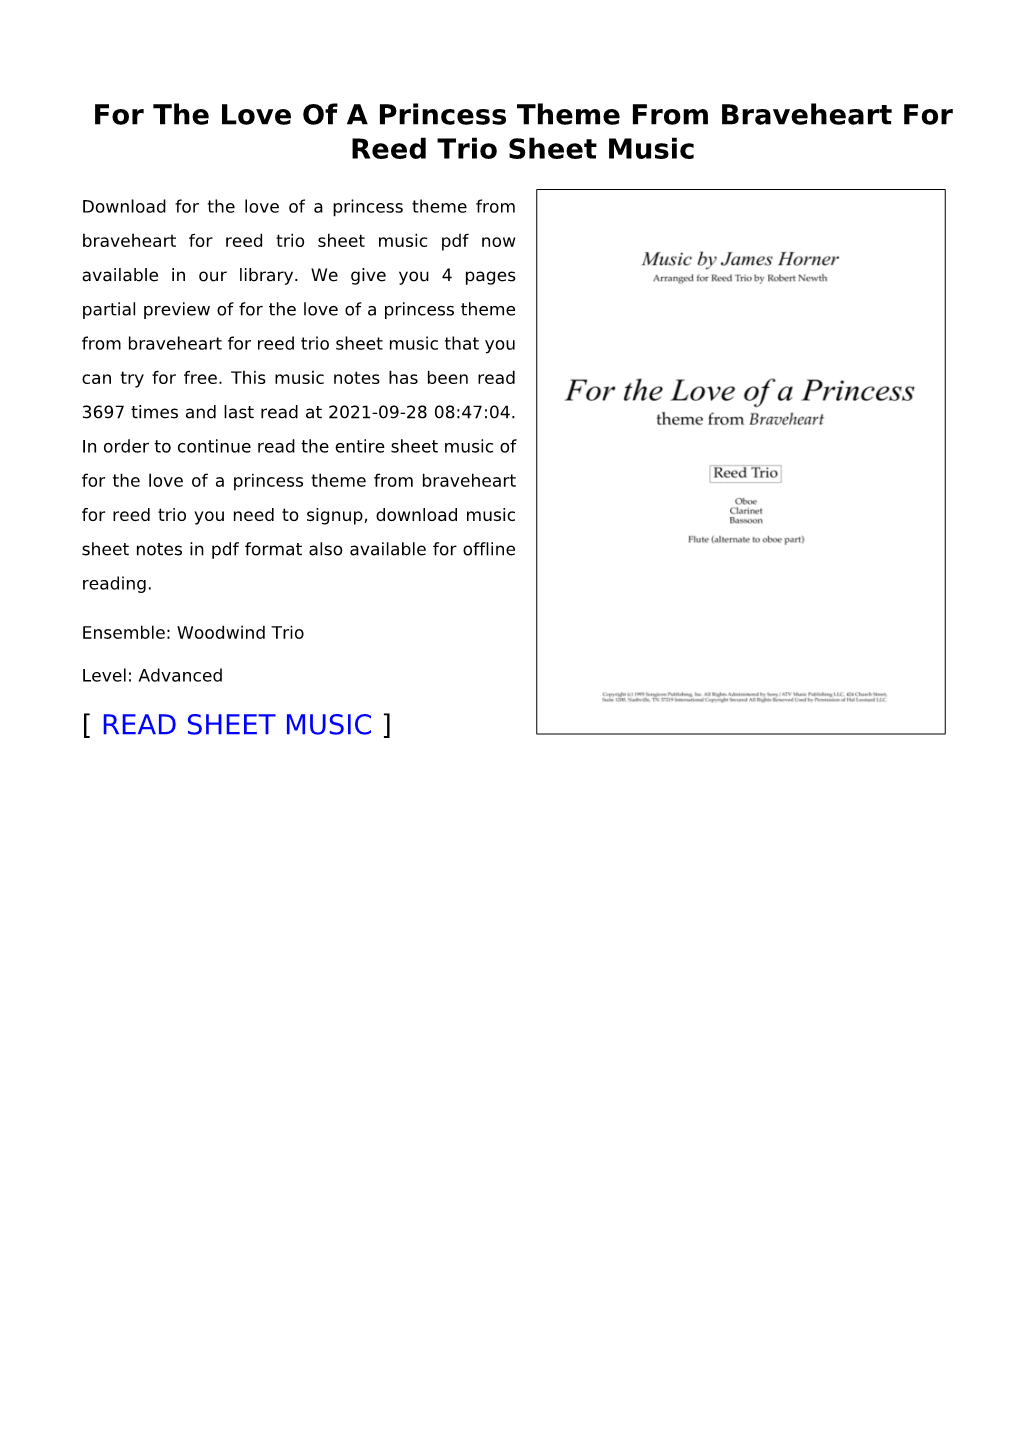 For the Love of a Princess Theme from Braveheart for Reed Trio Sheet Music